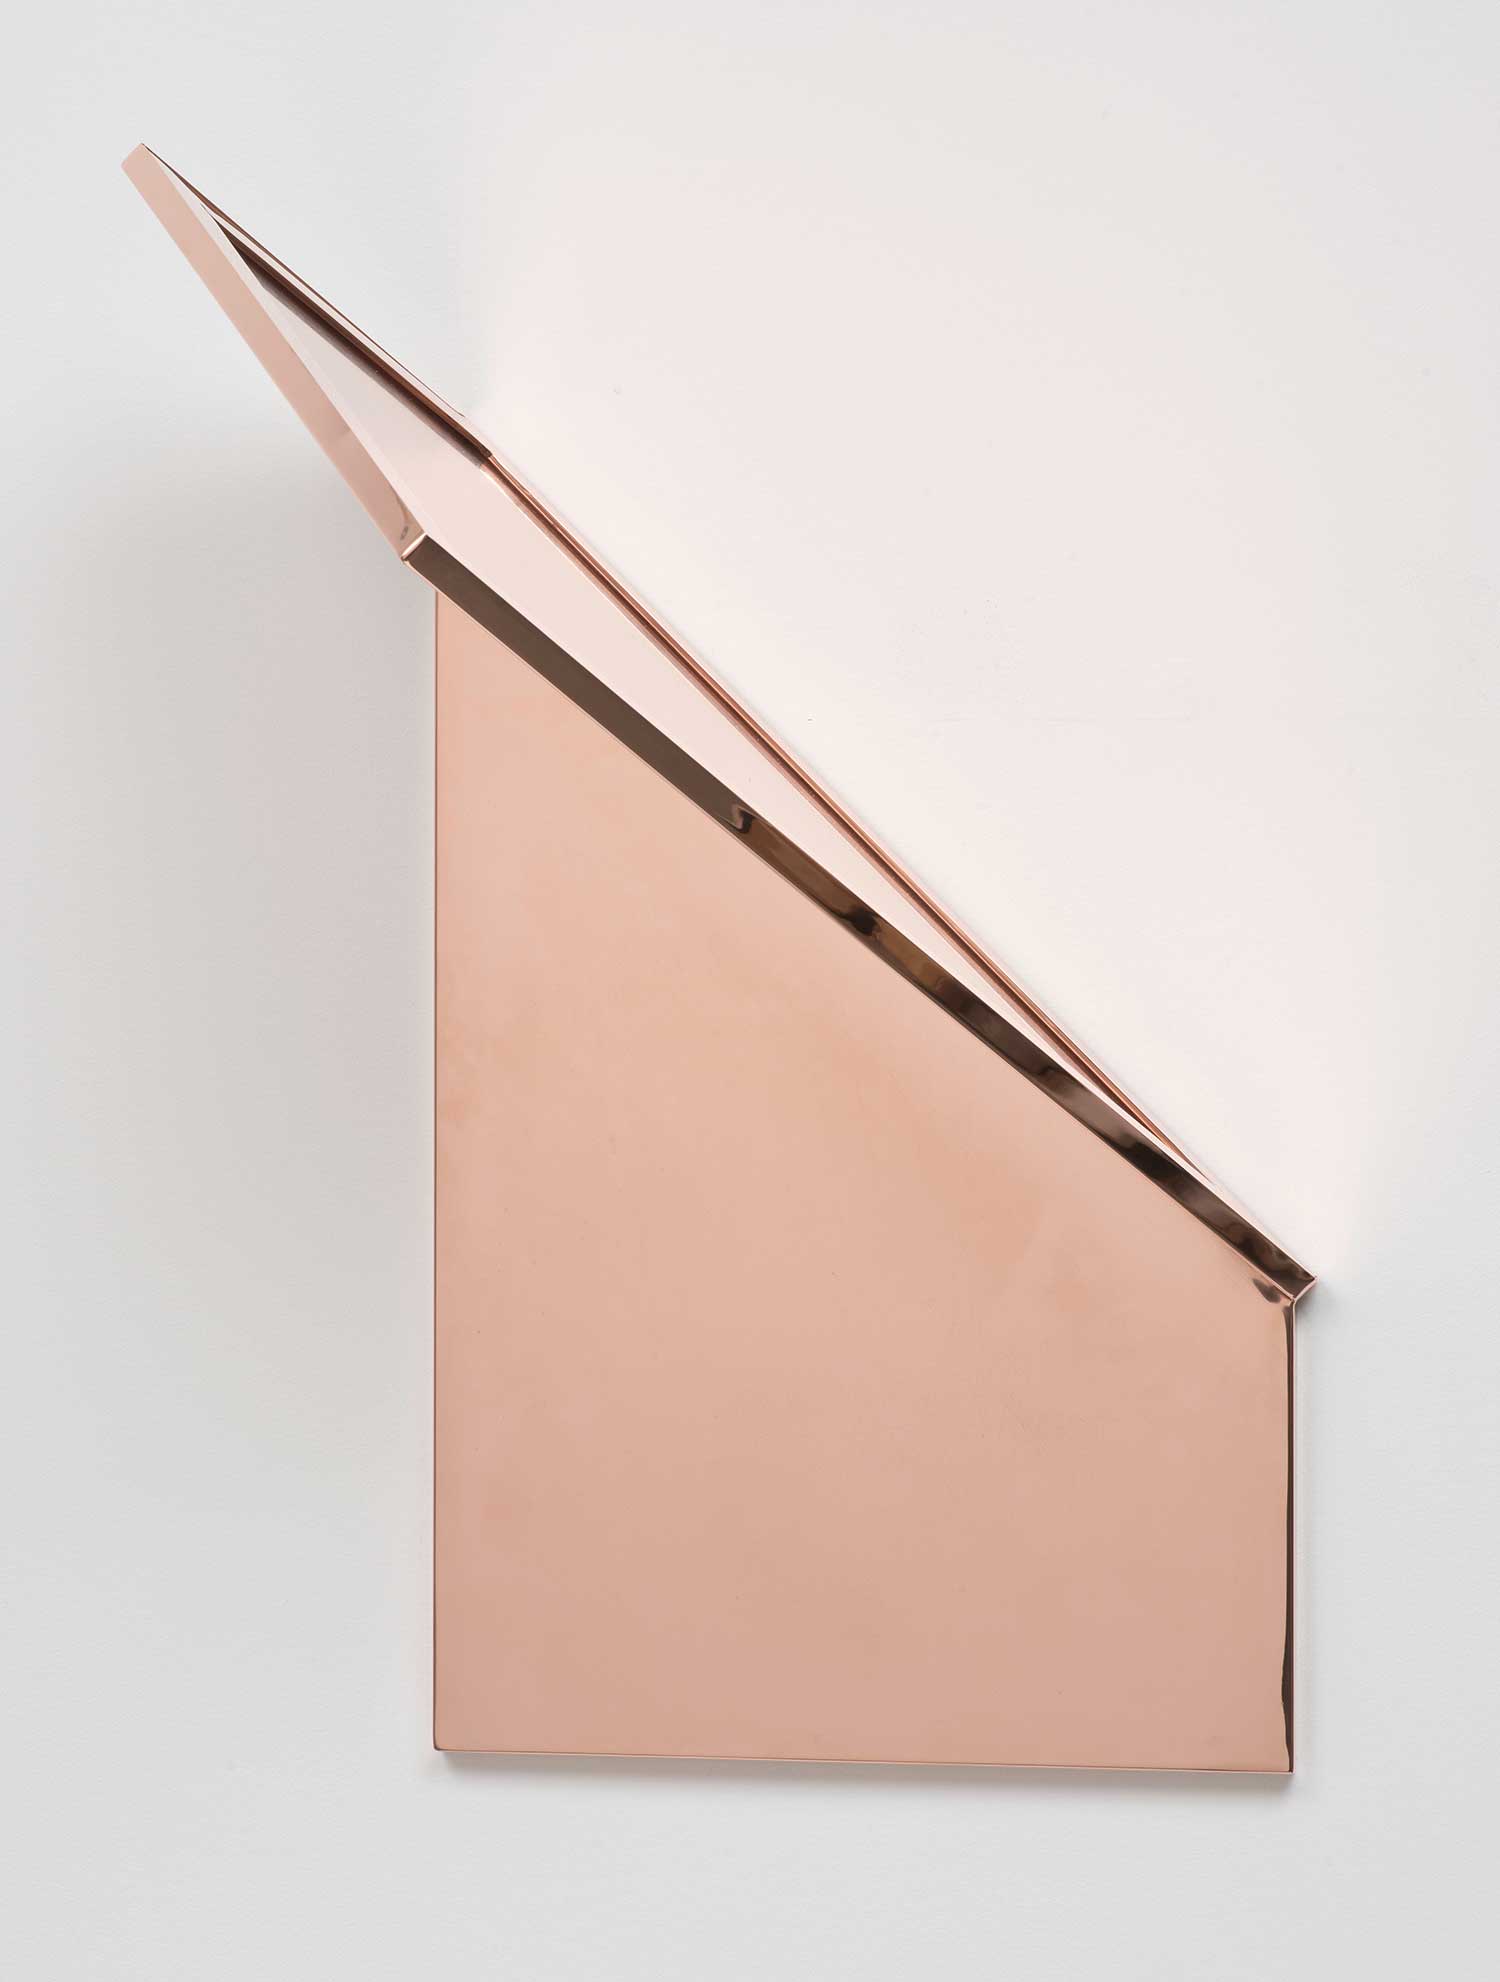 1:4 Scale Copper Surrogate (50/50 Bend, 45Â°/45Â°/90Â°: Febuary 8, 2013â€“, Los Angeles, California), 2013â€“, polished copper, 38.1 x 36.8 x 50.8 cm. Photo: Brian Forrest, courtesy of the artist and Regen Projects, Los Angeles